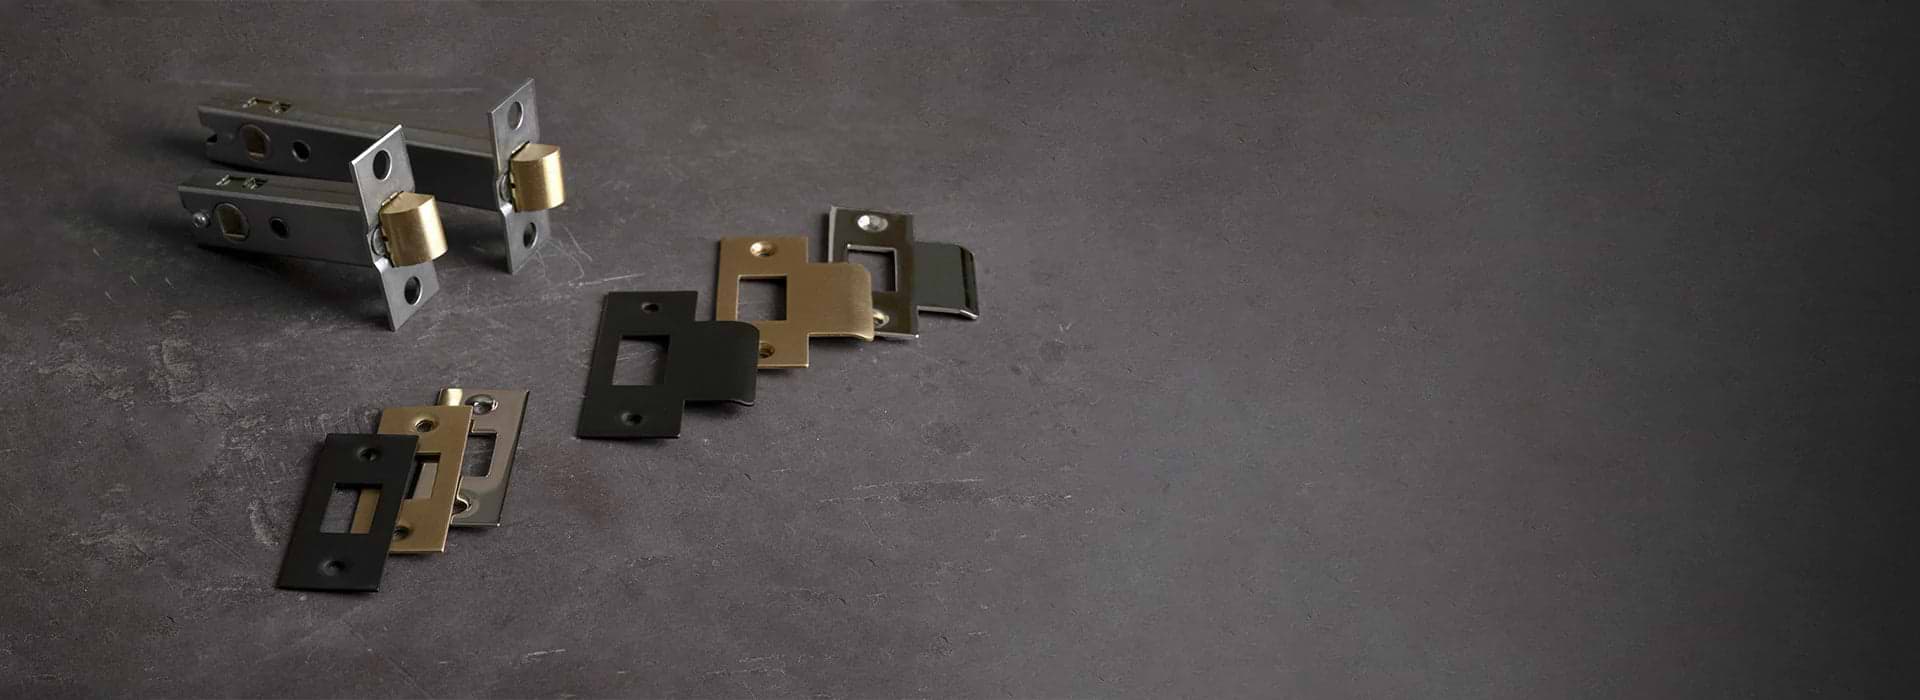 selection of locks and latches in different Corston finishes